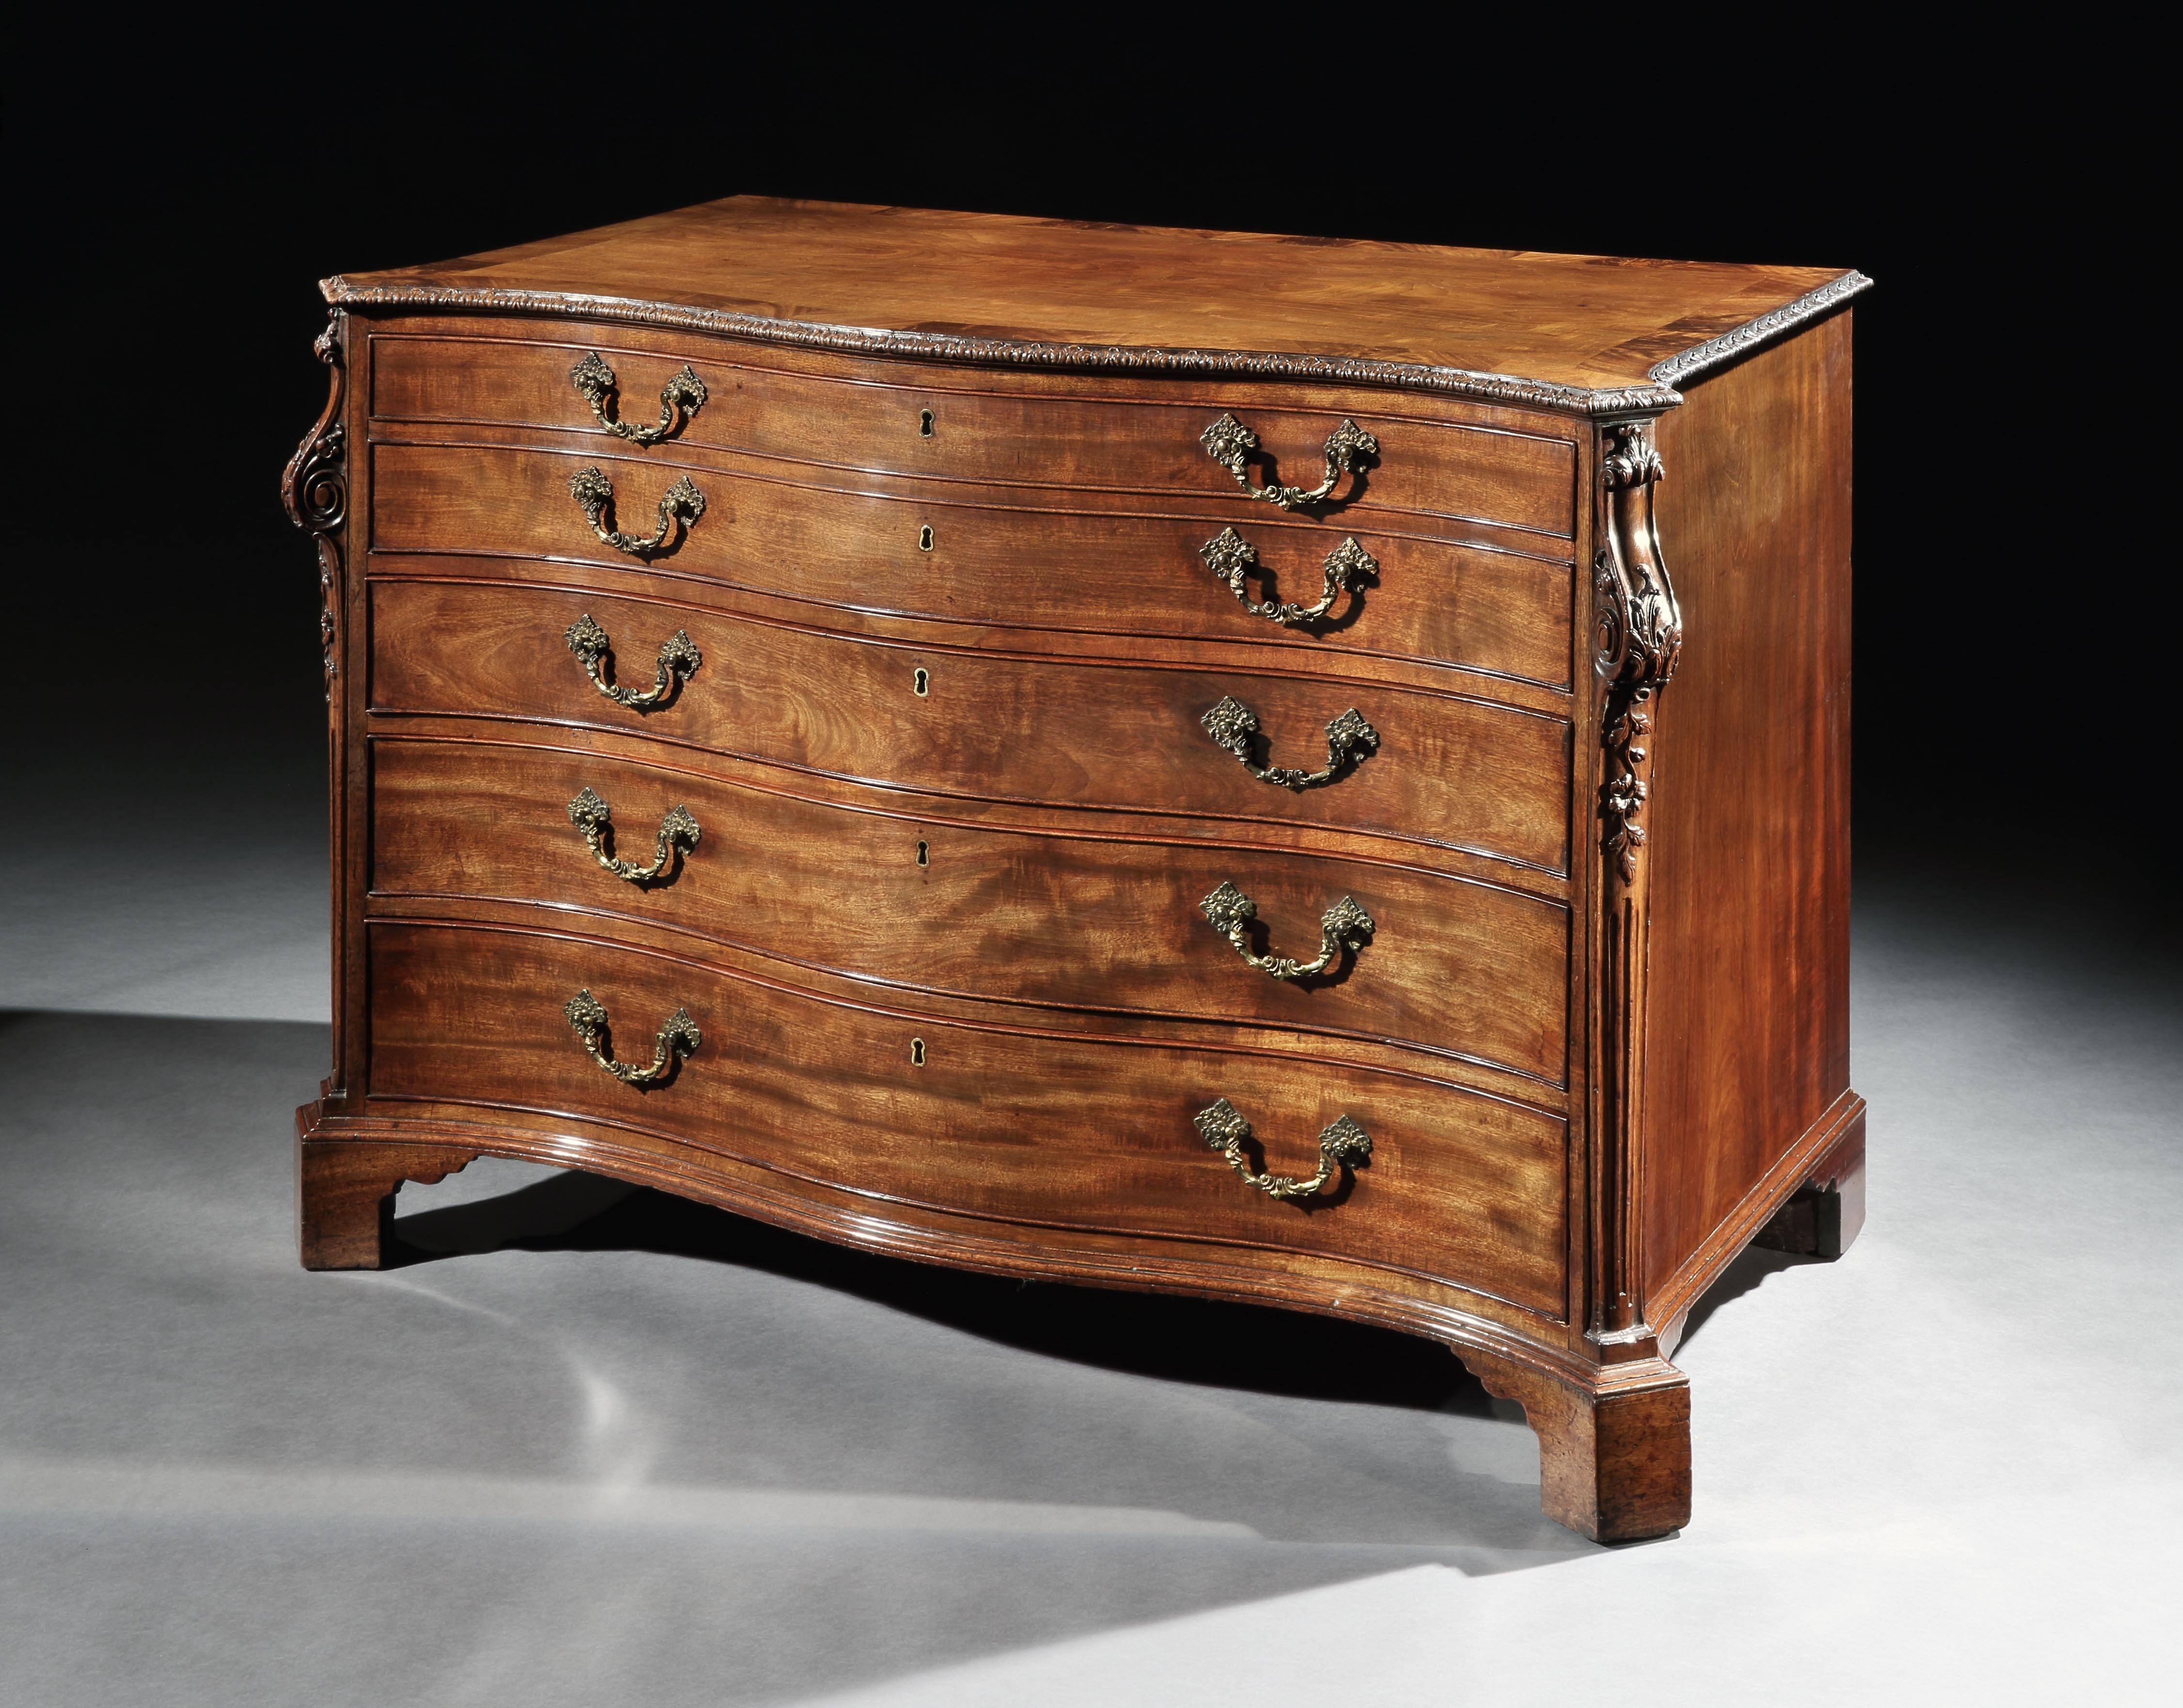 A very fine and rare George III Chippendale period mahogany secretaire-dressing chest of exceptional scale and quality attributed to William Gomm. The shaped serpentine cross-banded top with acanthus carved leading edge, with canted corners carved